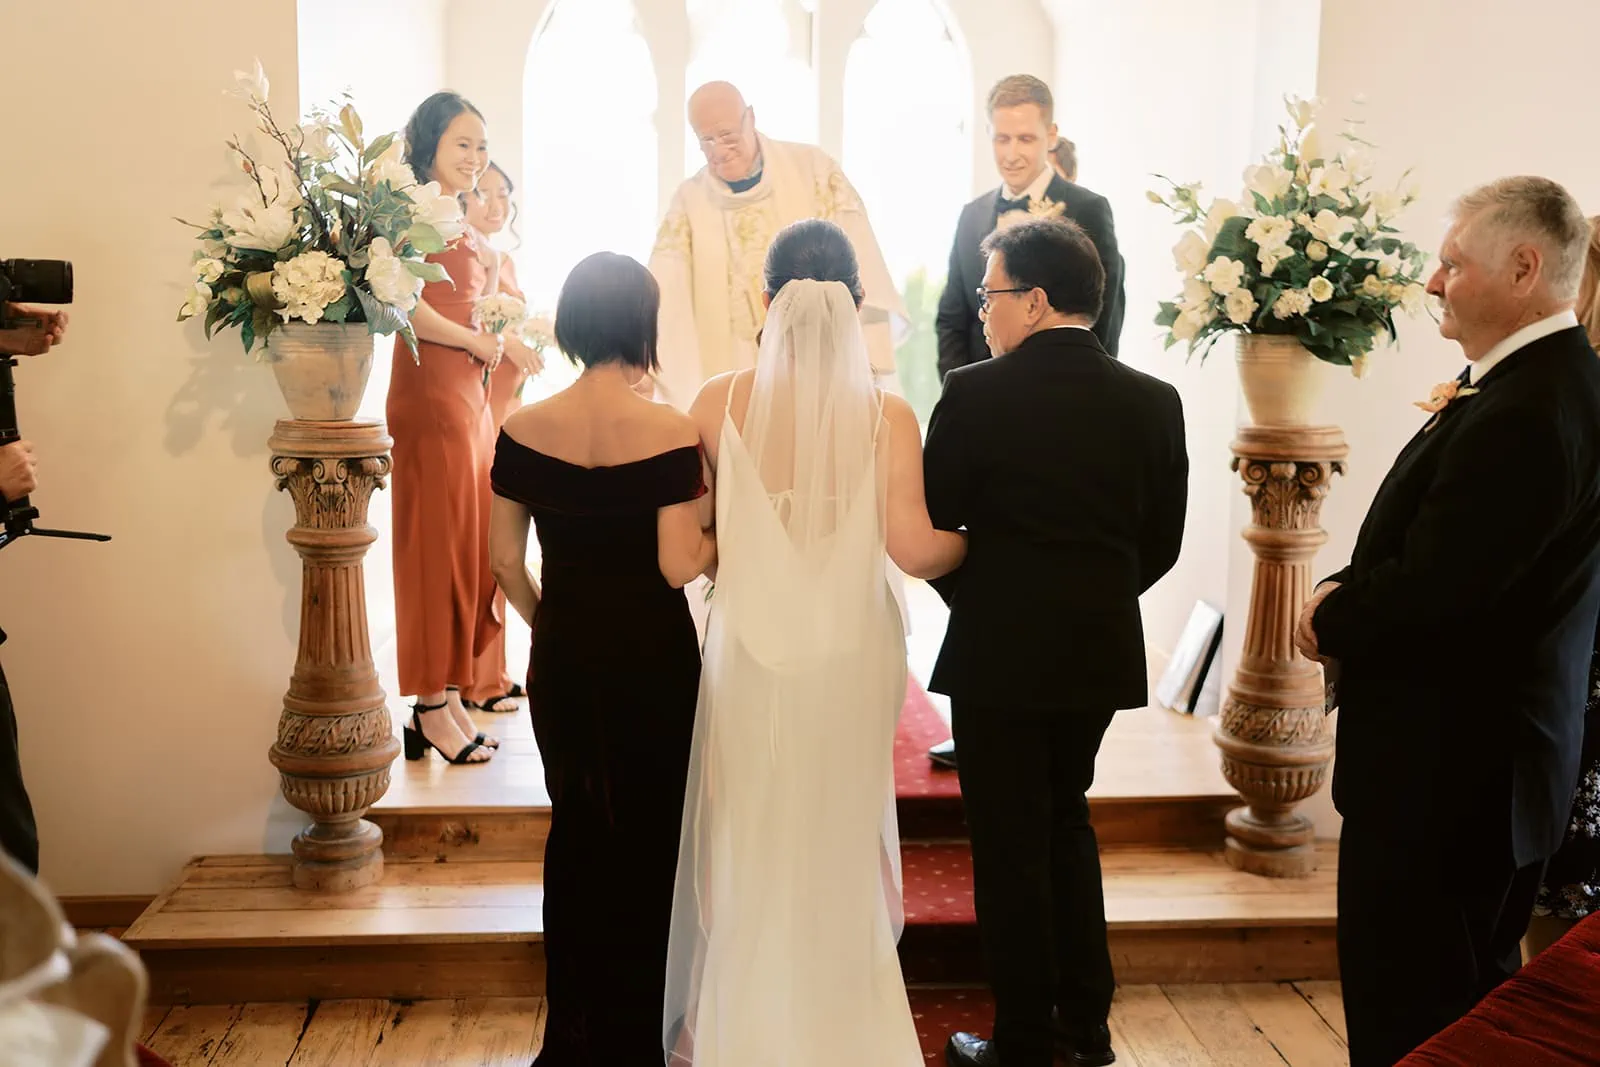 Queenstown Elopement Heli Wedding Photographer クイーンズタウン結婚式 | The wedding ceremony of Mj & Shane at Stoneridge Queenstown, with a bride and groom in a church setting.